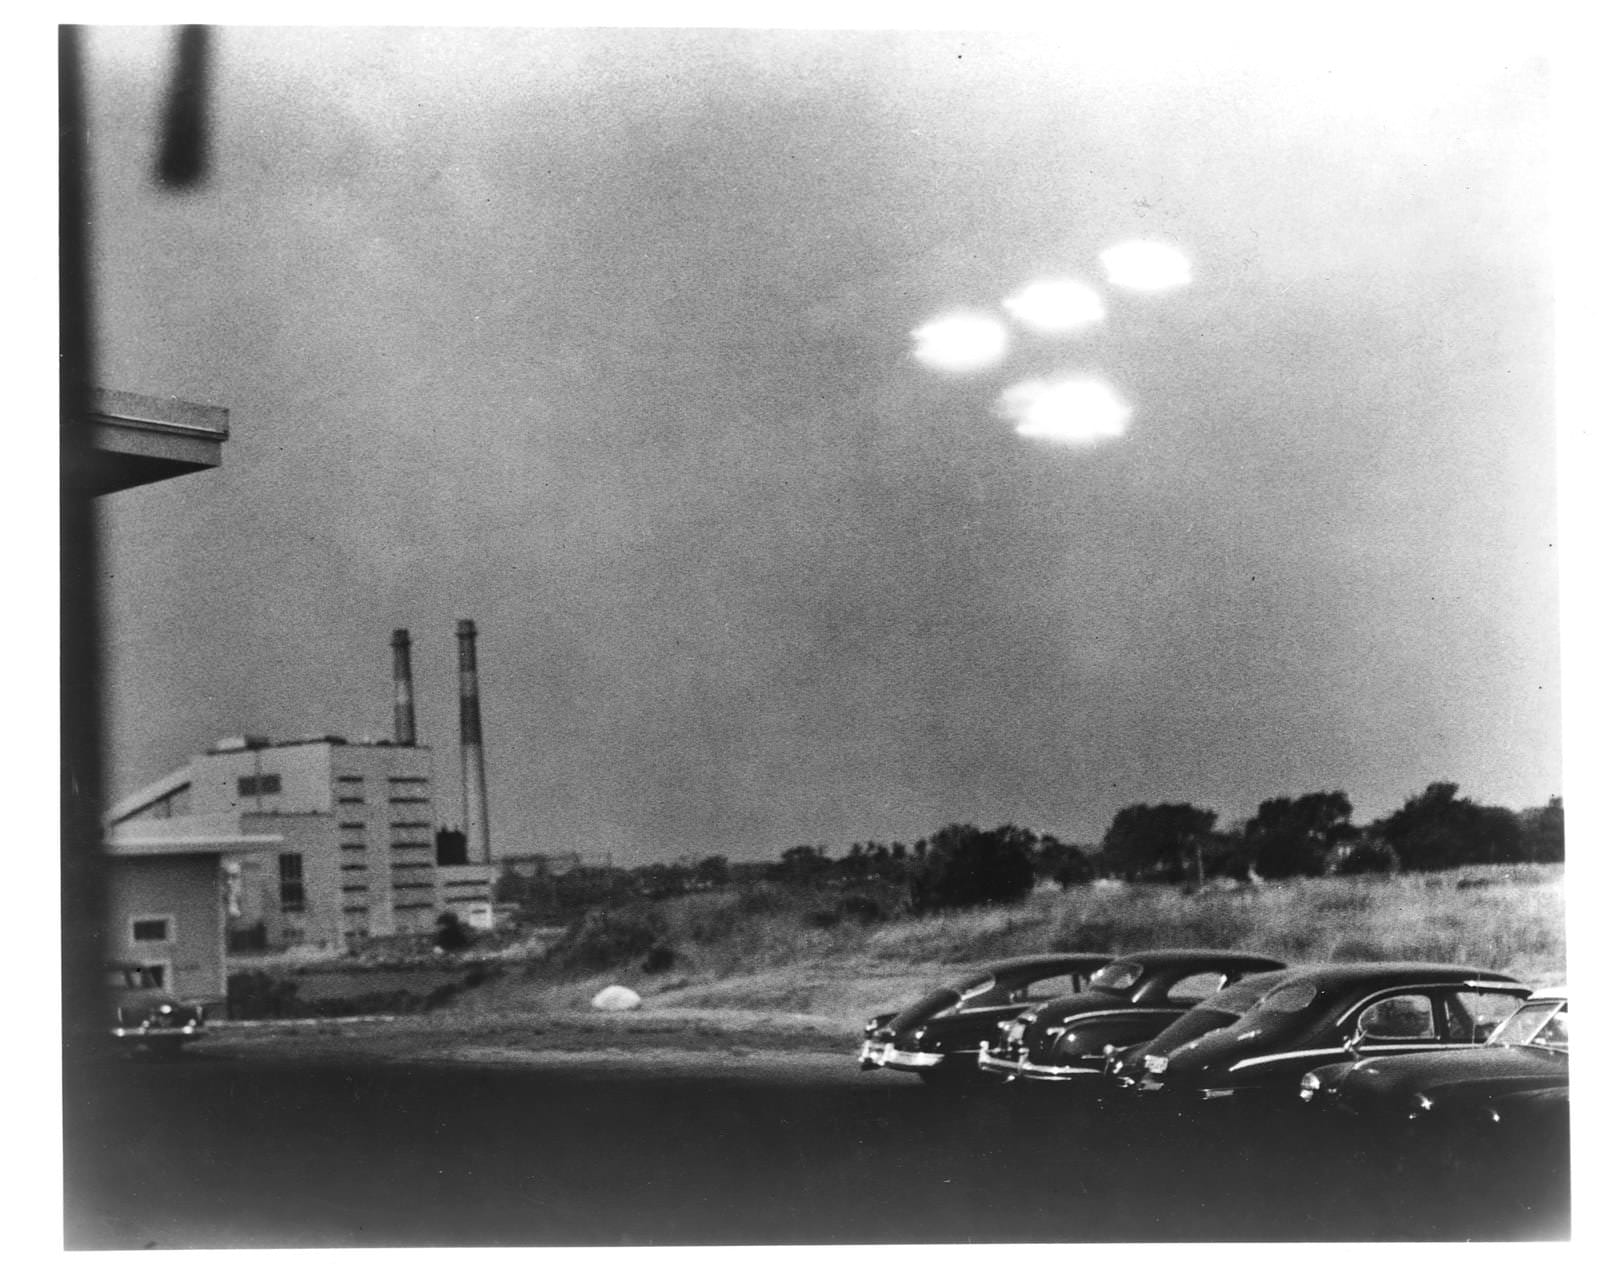 Four unidentified flying objects glowing in the sky at 9:35 a.m. on July 15, 1952, in Salem, Massachusetts